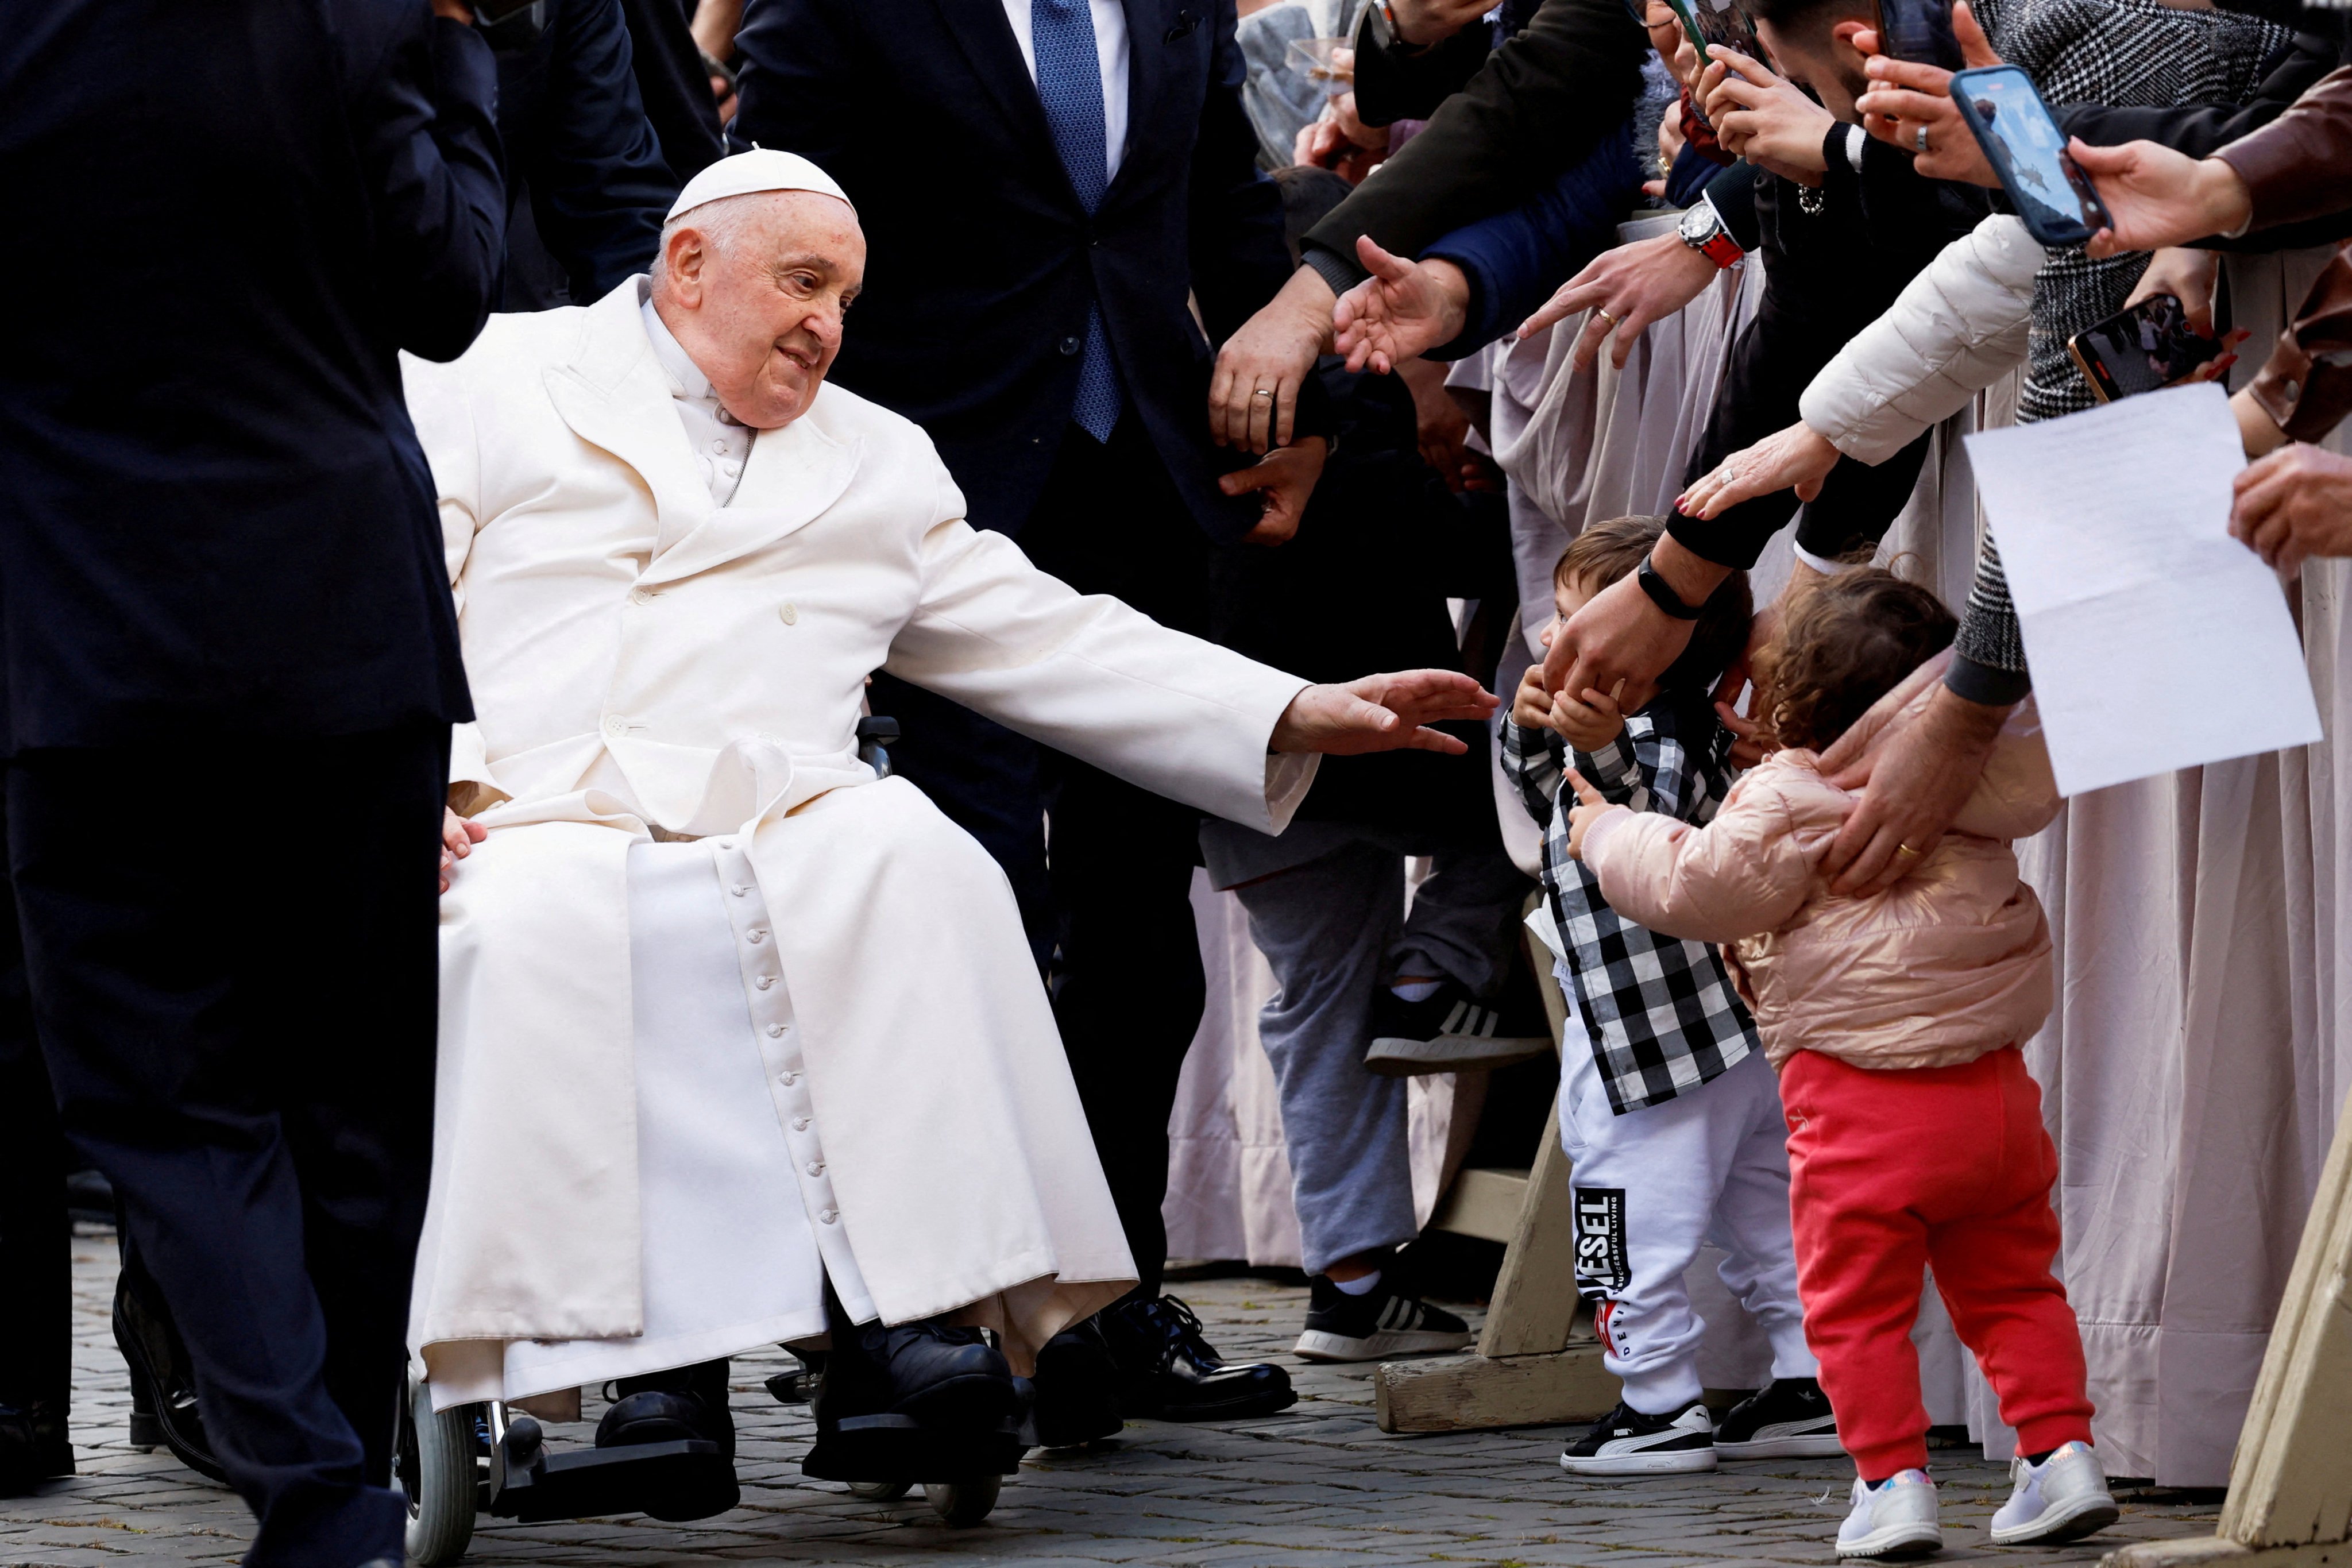 Pope Francis greets the faithful in Saint Peter’s Square at the Vatican. Photo: Reuters